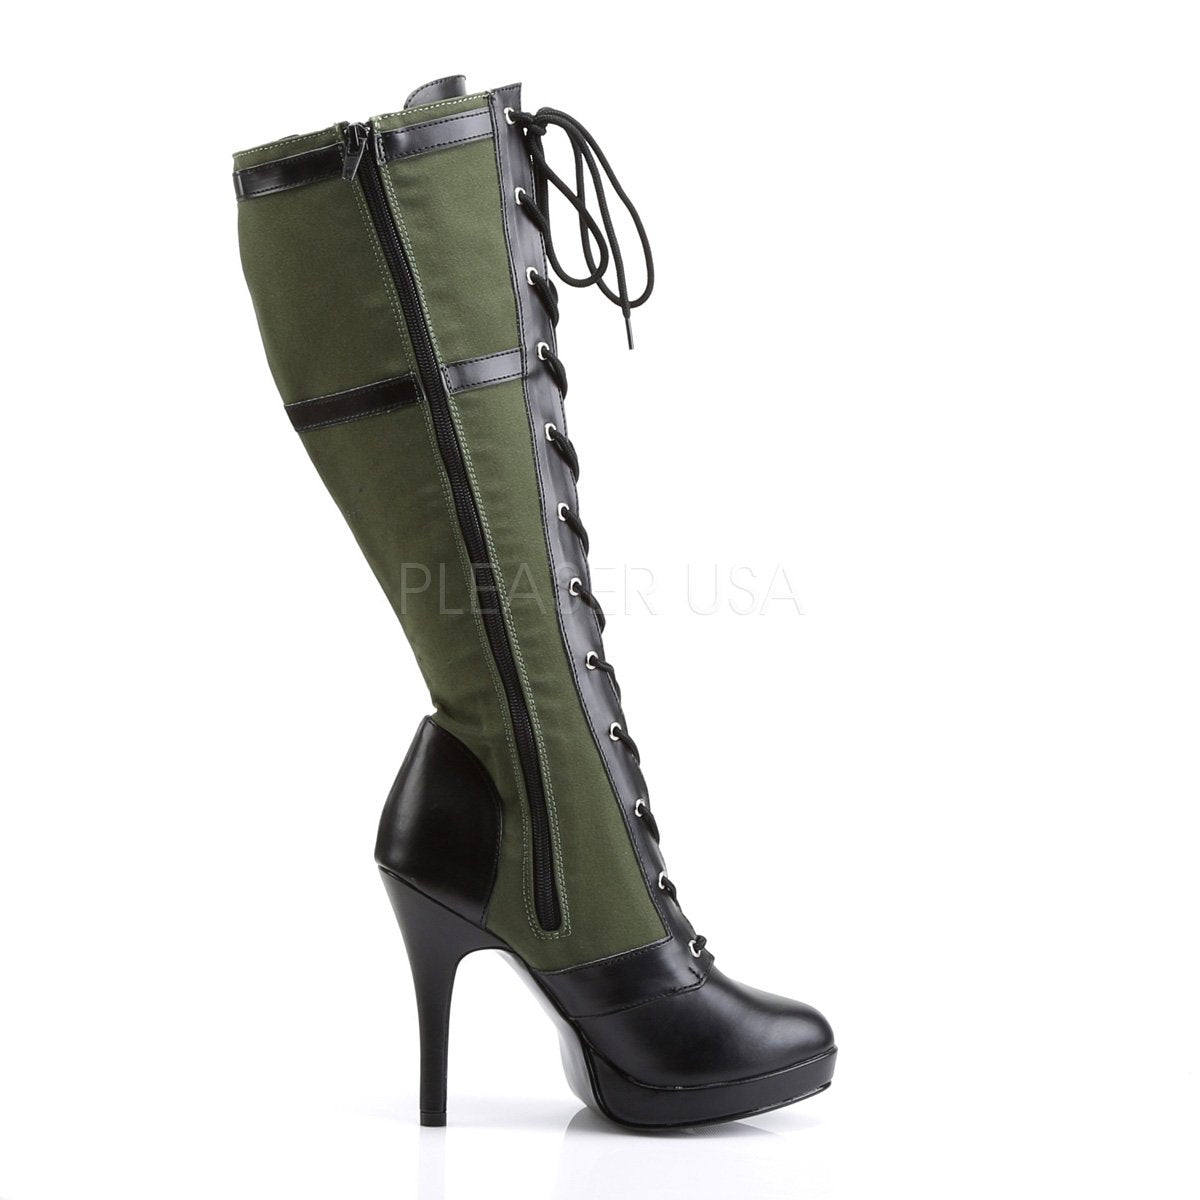 knee high military boots